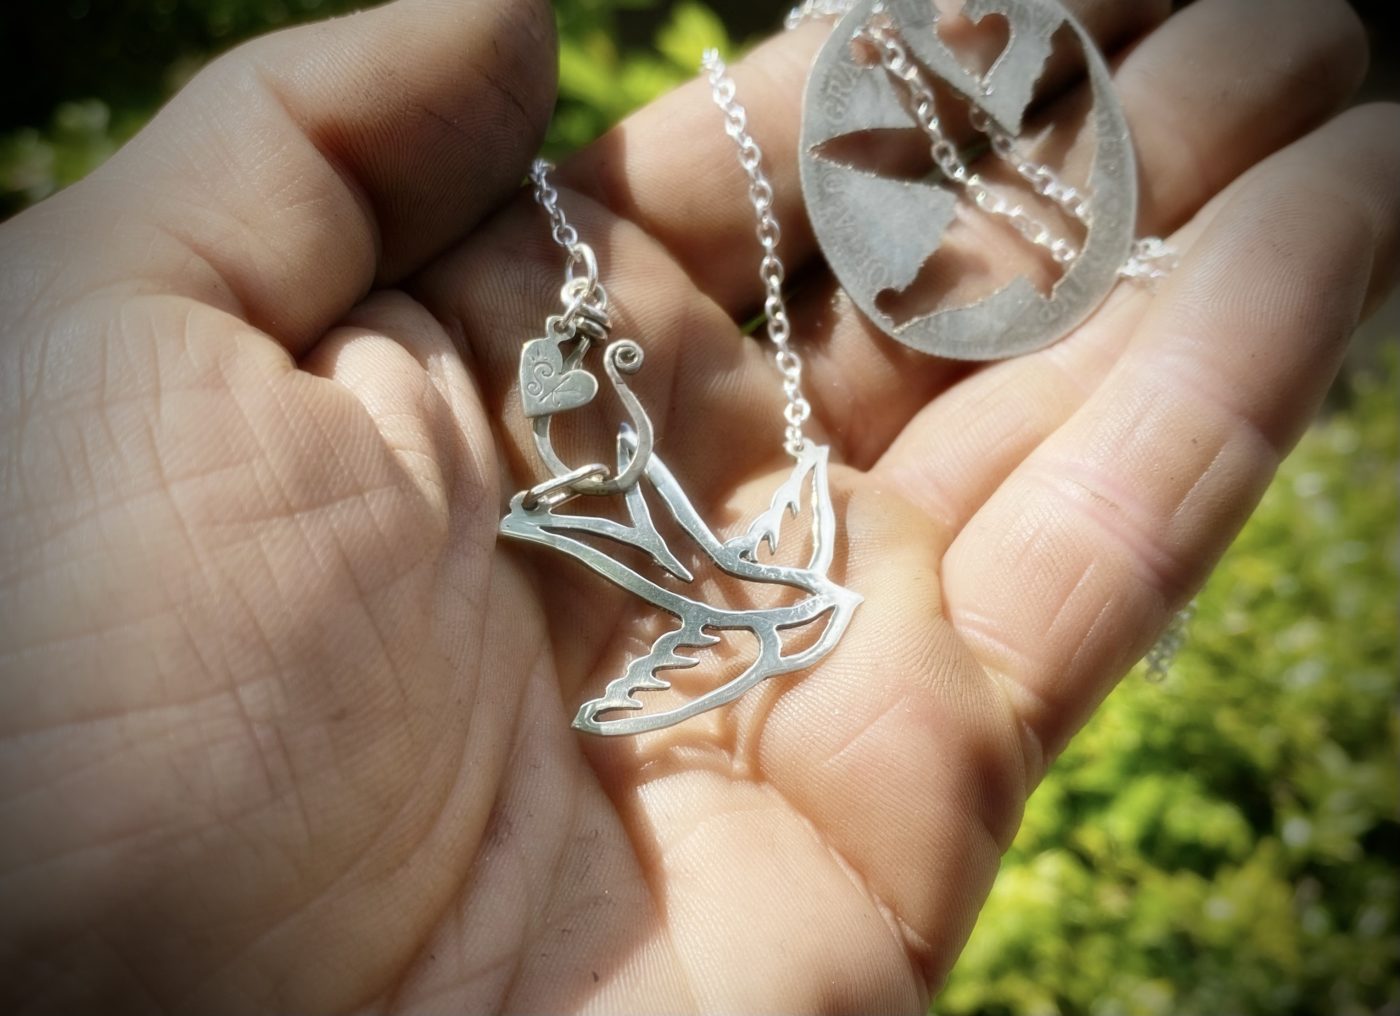 freedom and love jewellery handmade and recycled silver coins, spoons and forks